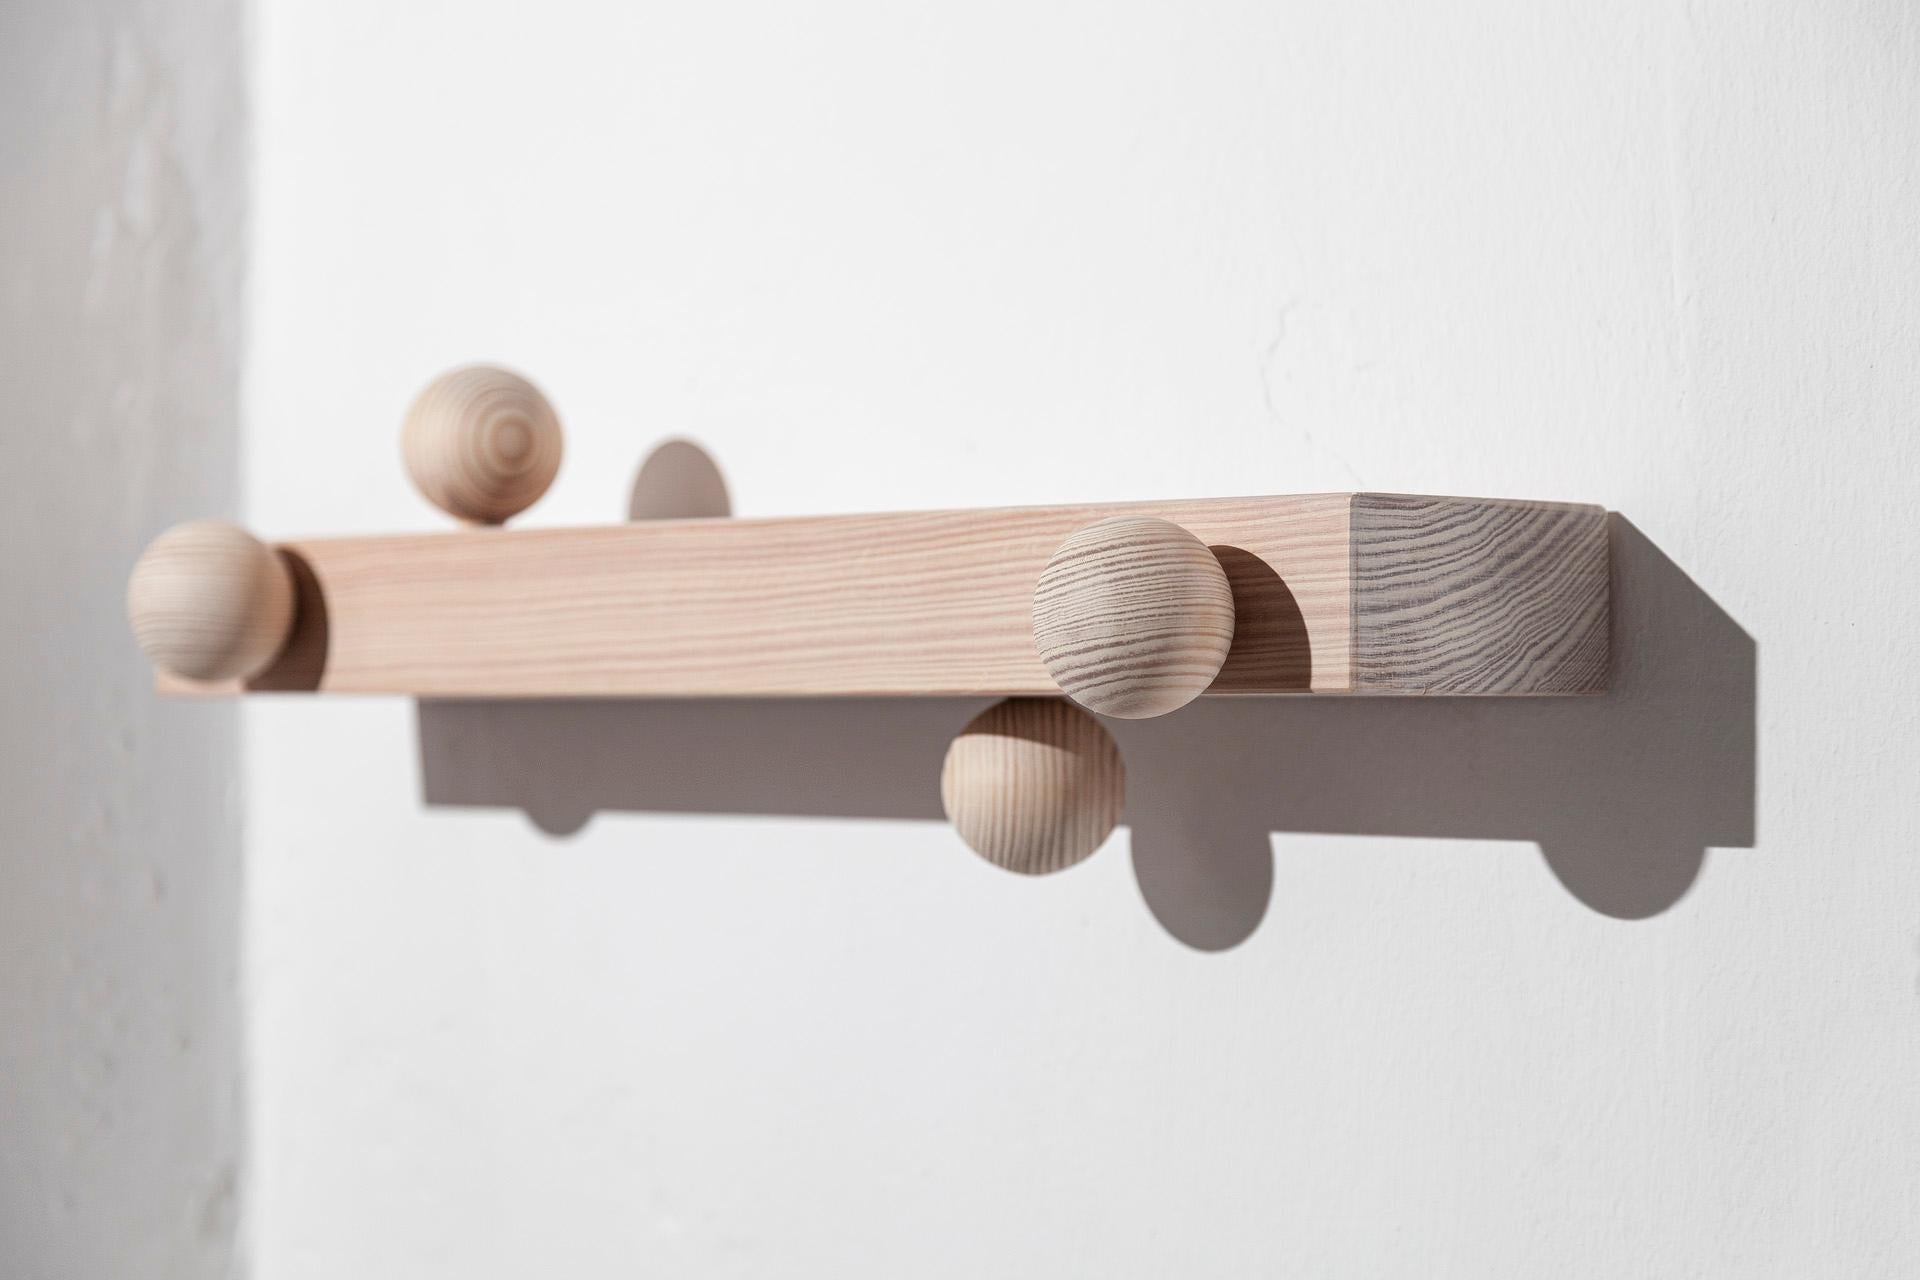 Burly is the name of this collection of solid pine wood coat hangers. Designed by João Xará and handmade in Portugal, this coat hanger has a set of spheres - made with the help of an artisan specialized in turned wood - serving as hangers, in